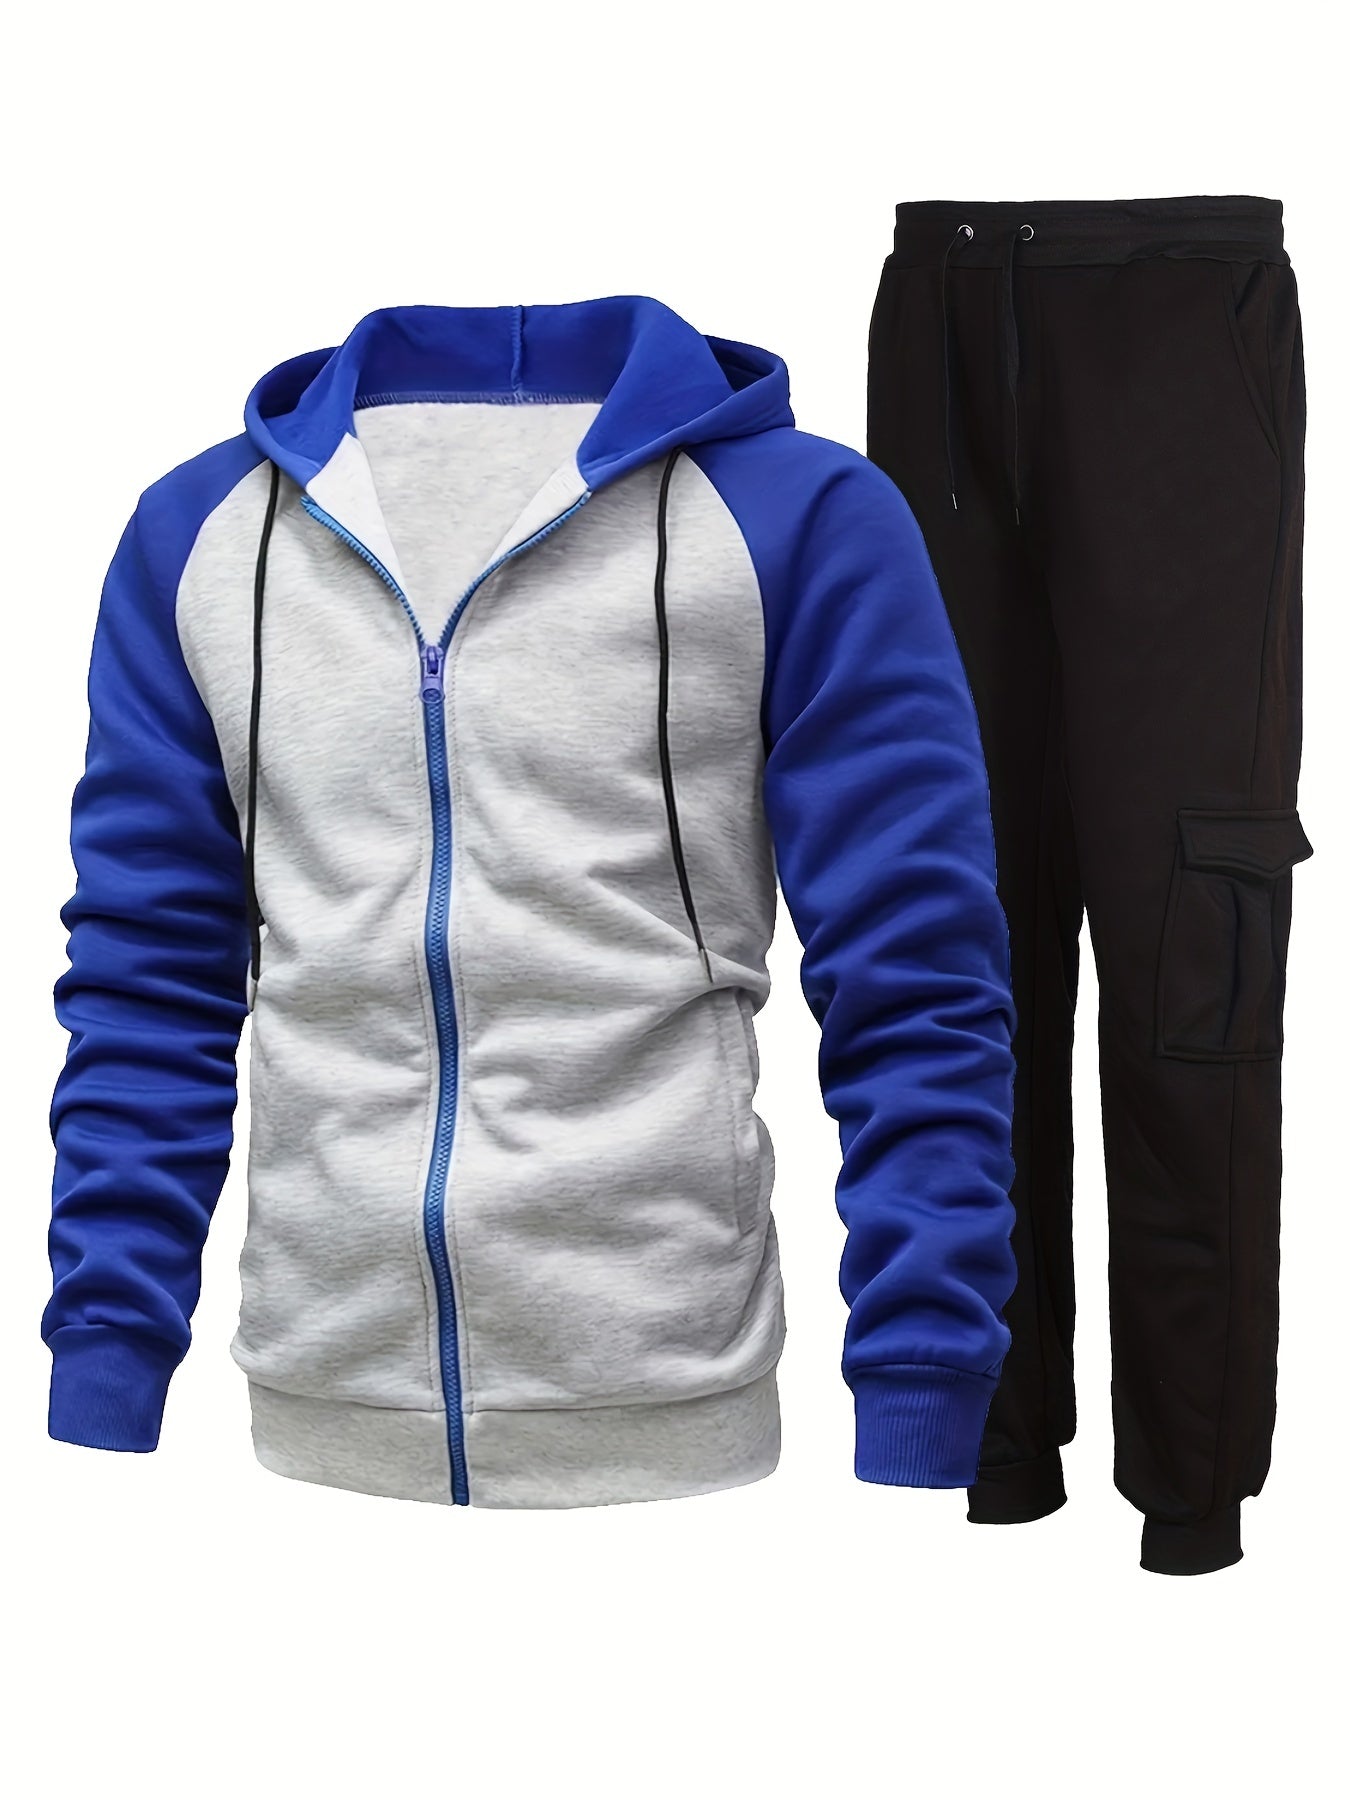 Classic Men's Athletic 2Pcs Tracksuit Set Casual Full-Zip Sweatsuits Long Sleeve Hoodie And Jogging Pants Set For Gym Workout Running